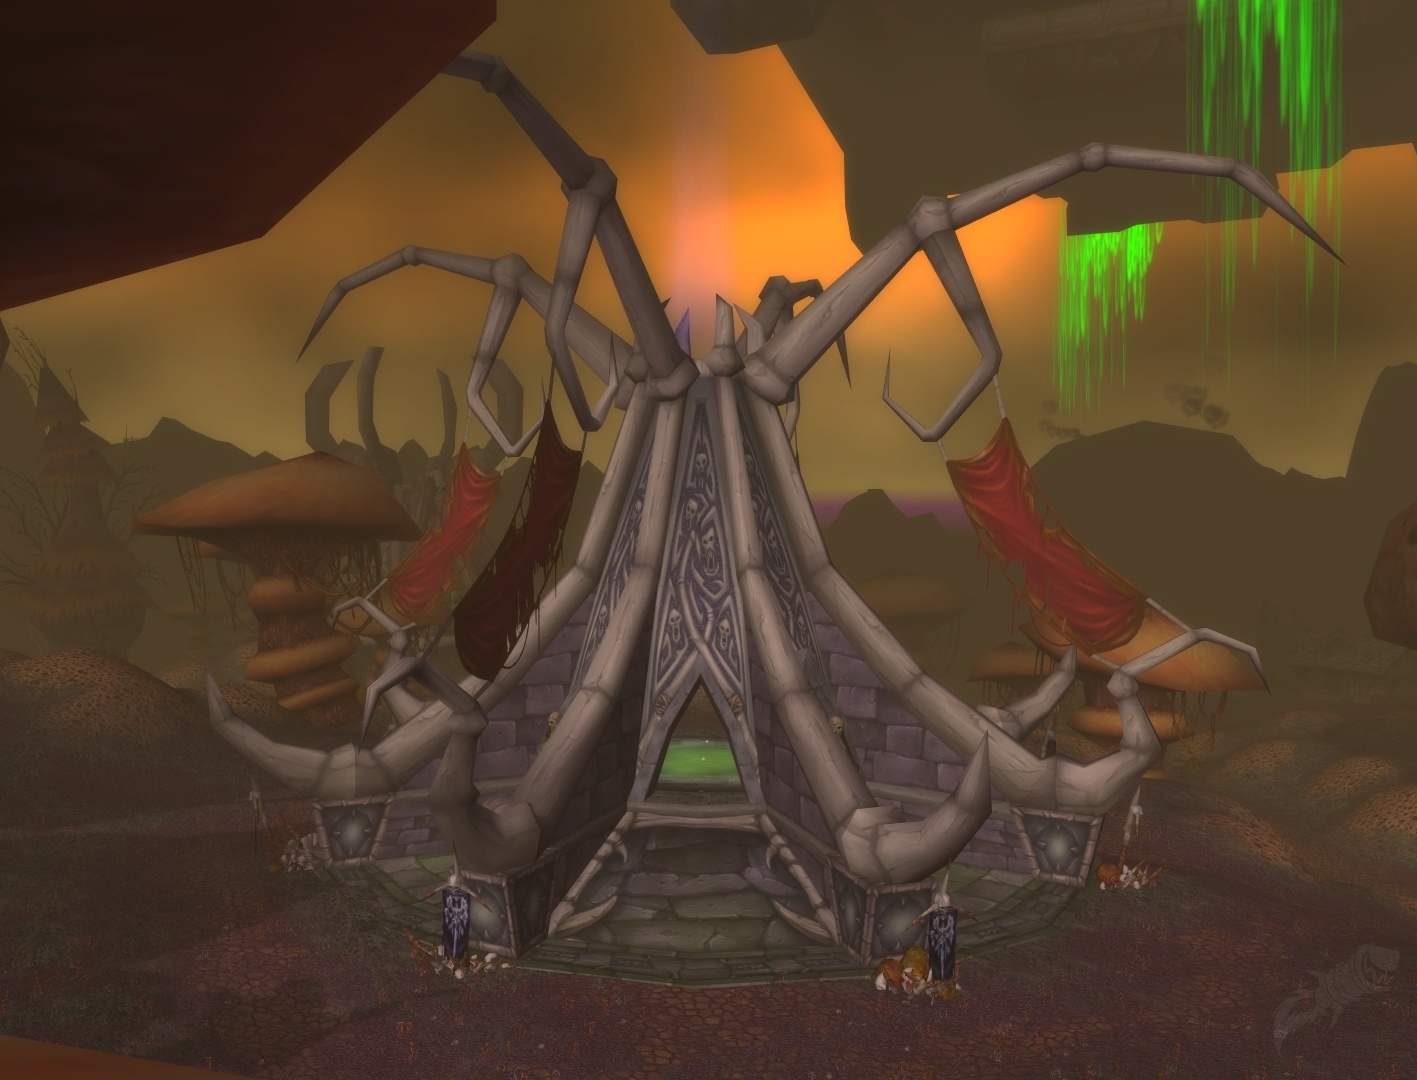 Is there an attunement for Naxx in Wotlk?